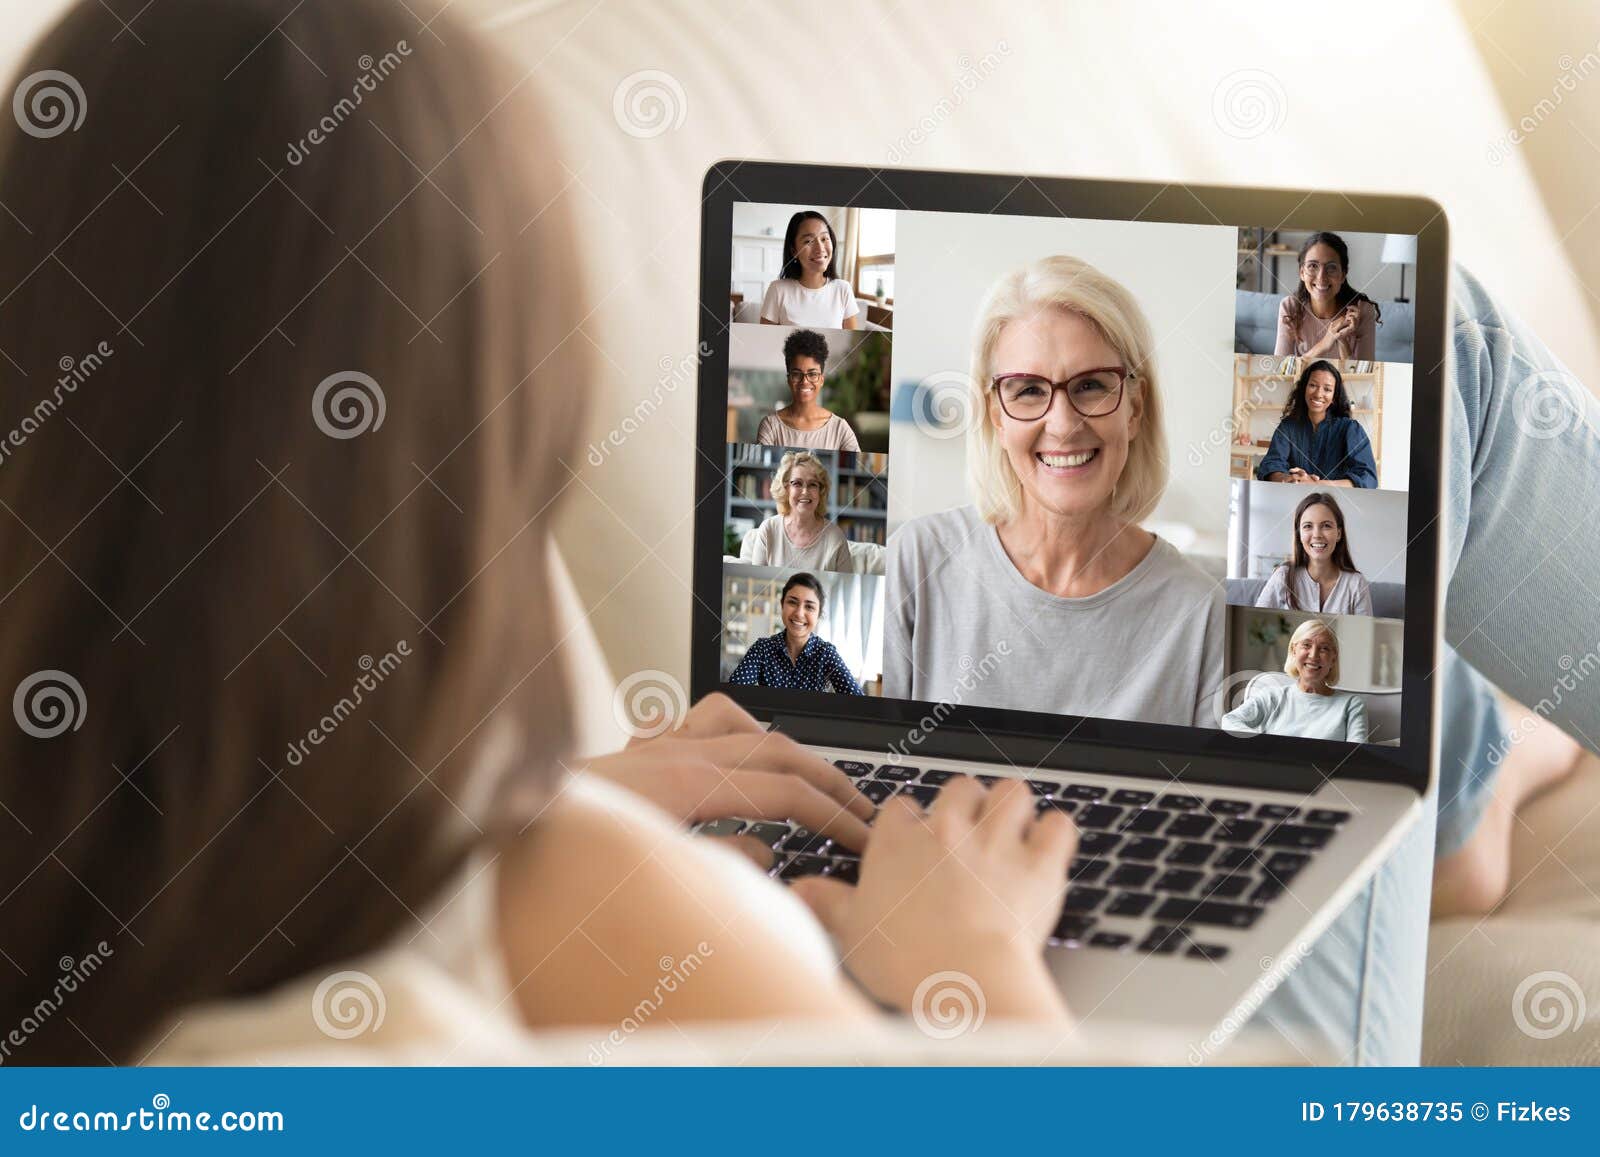 girl use laptop involved at group videocall with diverse women